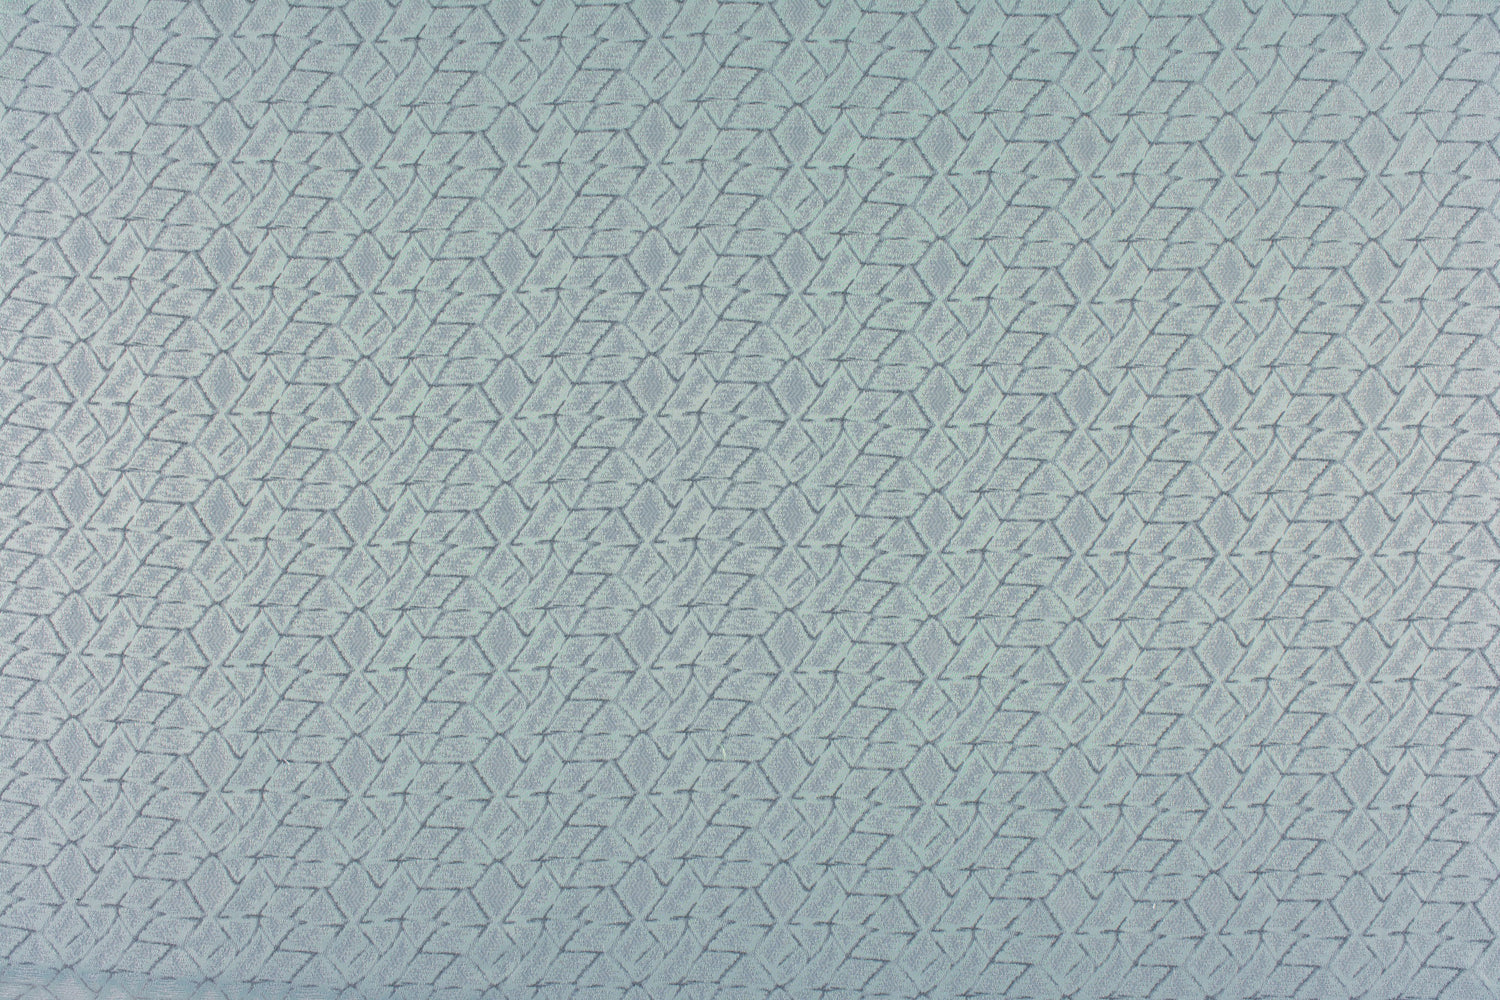 Grandy fabric in seaglass color - pattern number JM 00057592 - by Scalamandre in the Old World Weavers collection